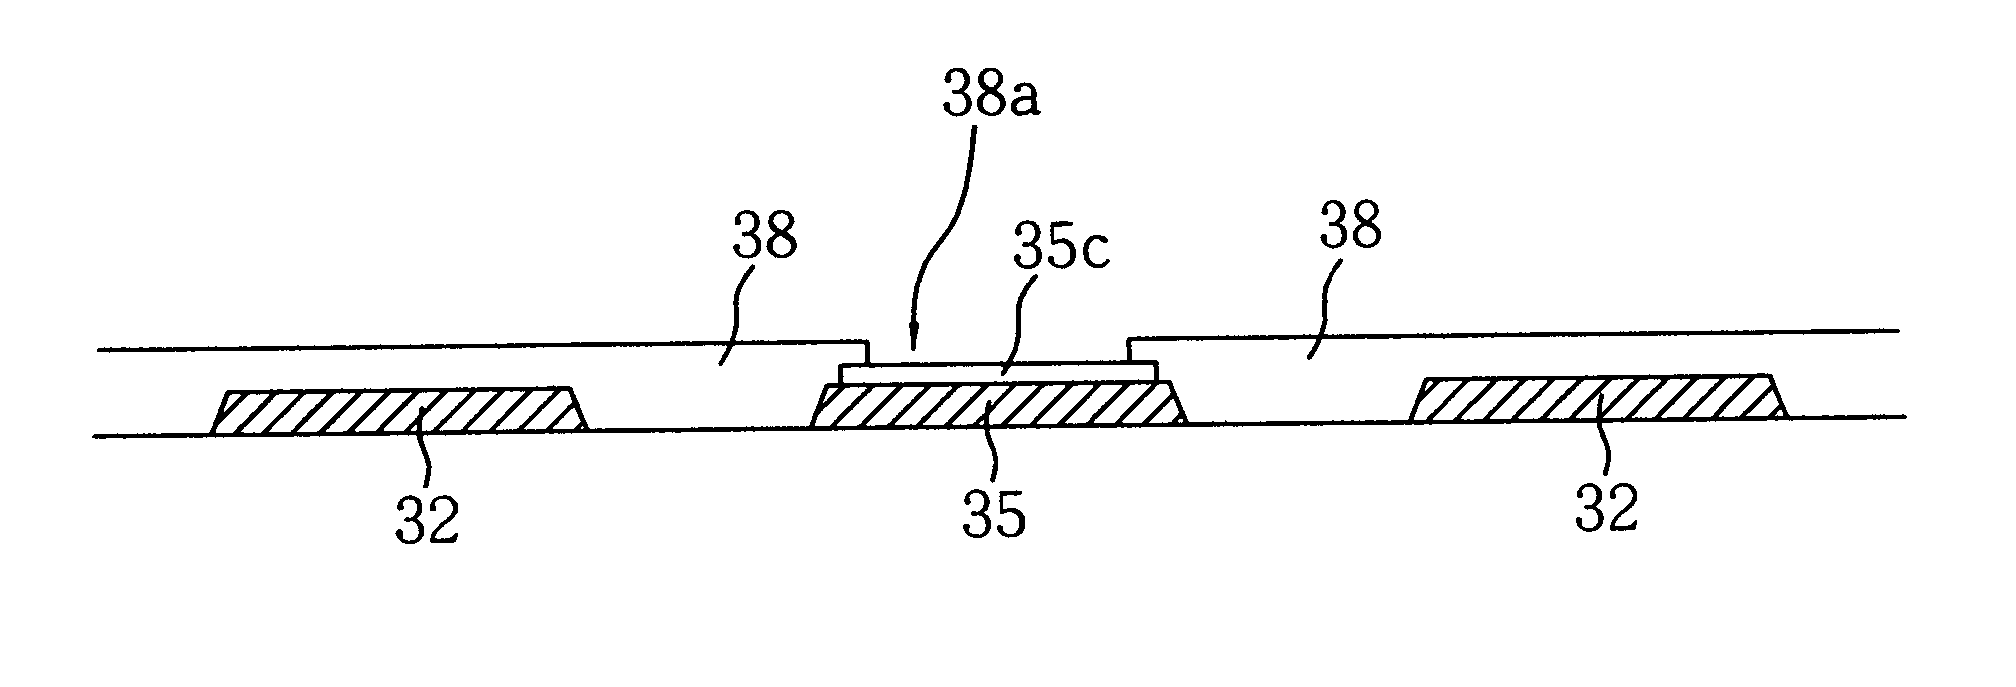 Semiconductor package substrate having bonding pads with plated layer thereon and process of manufacturing the same